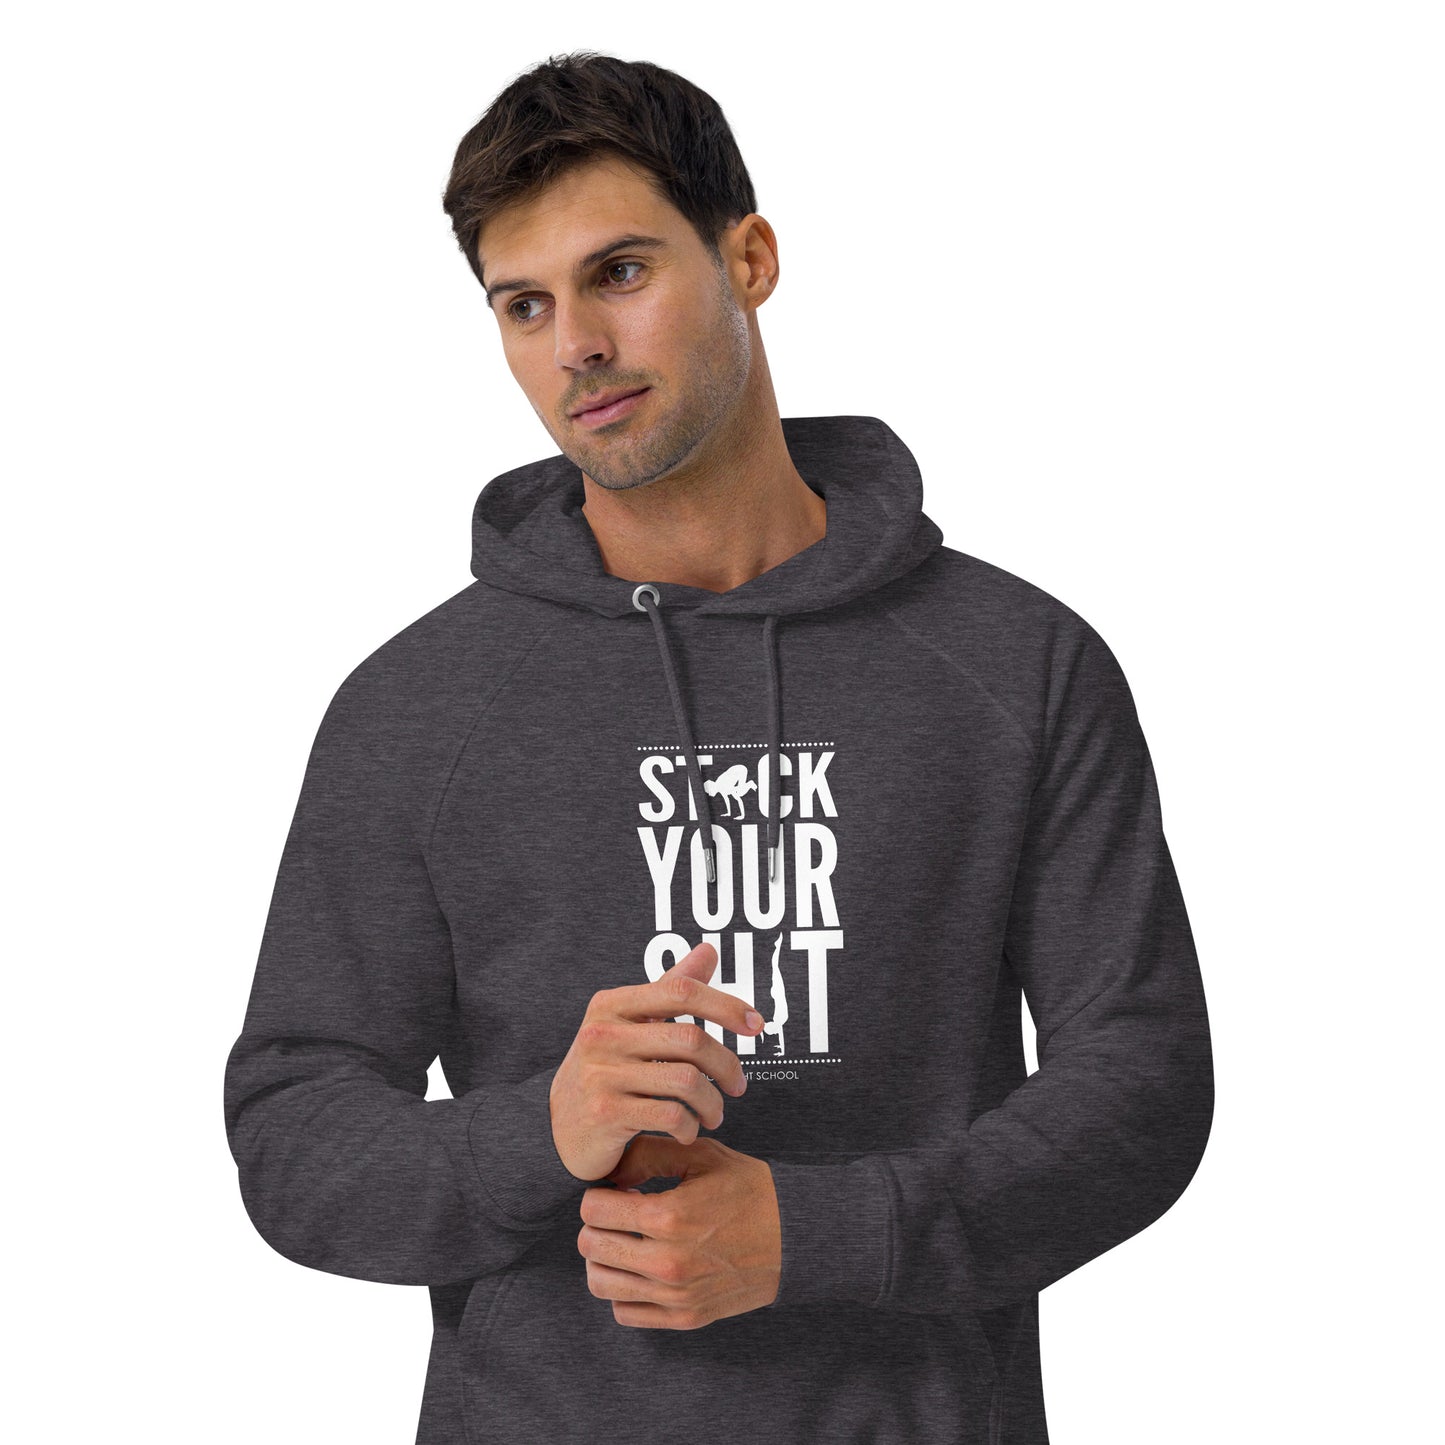 Stack Your Shit Unisex Eco Hoodie